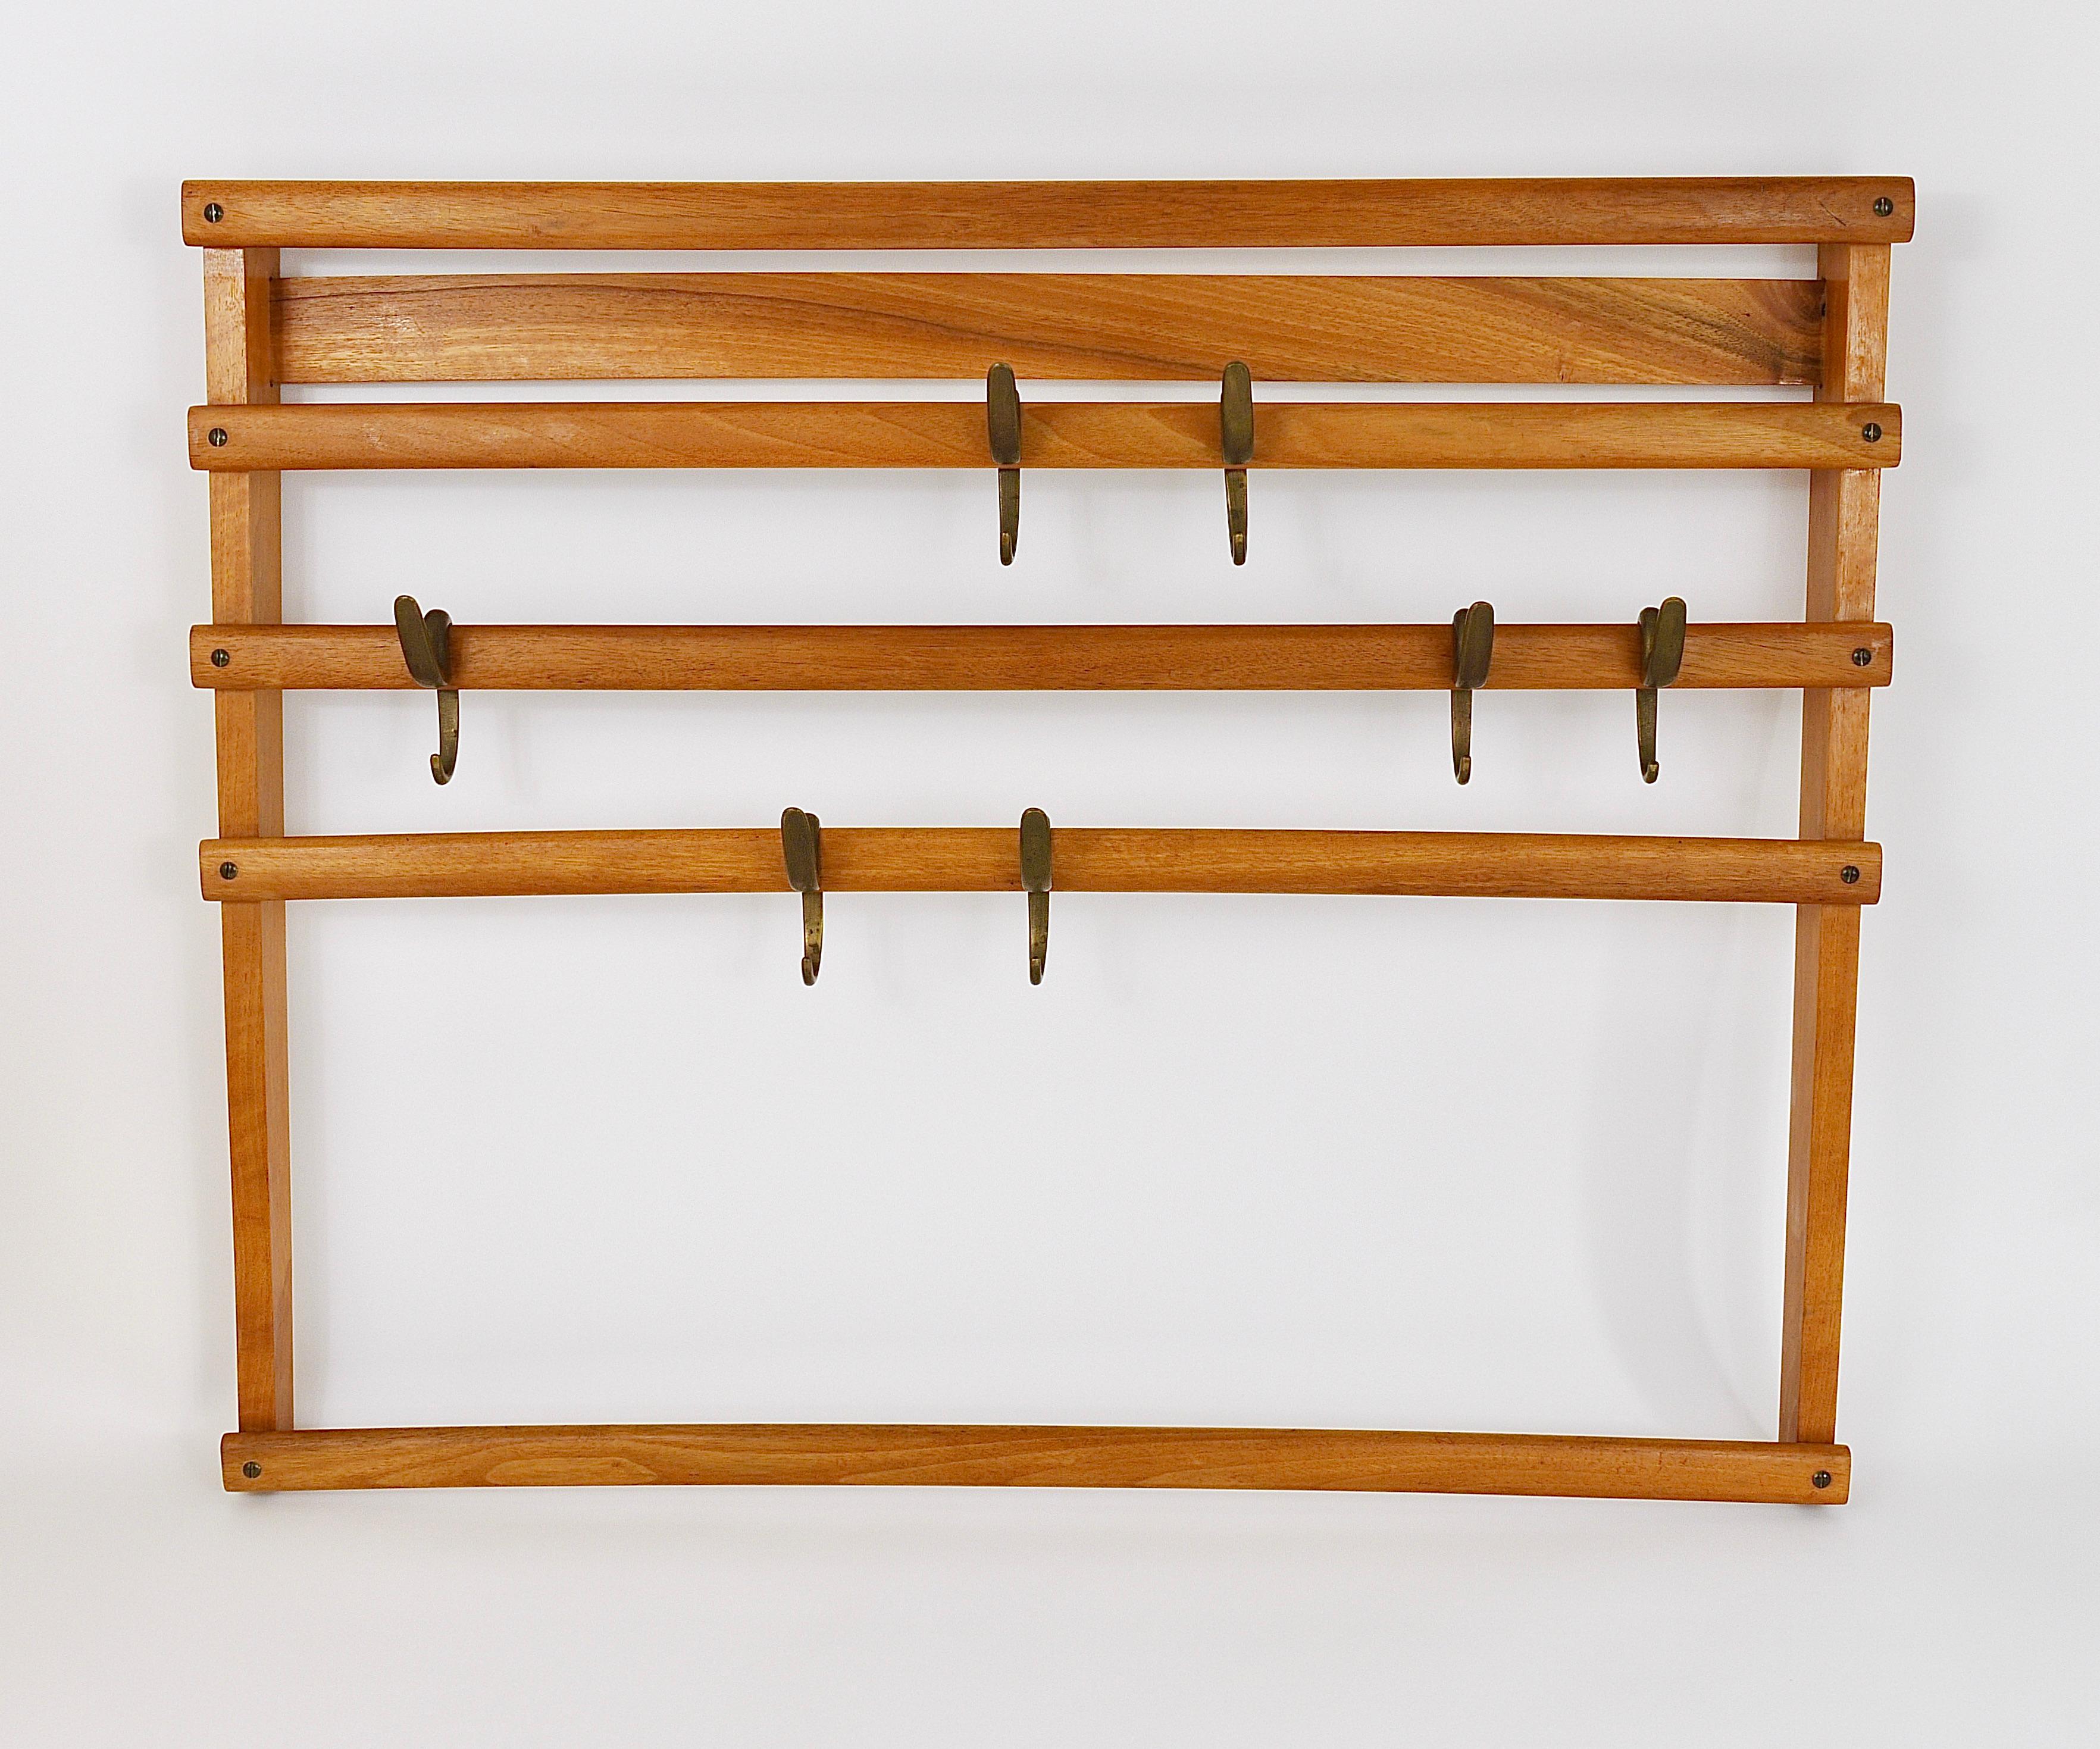 An elegant modernist wall-mounted coat rack from the 1950s. An original and old vintage object, designed and executed by the Austrian architect and designer Carl Auböck. The frame is made of beechwood and is equipped with seven lovely patinated